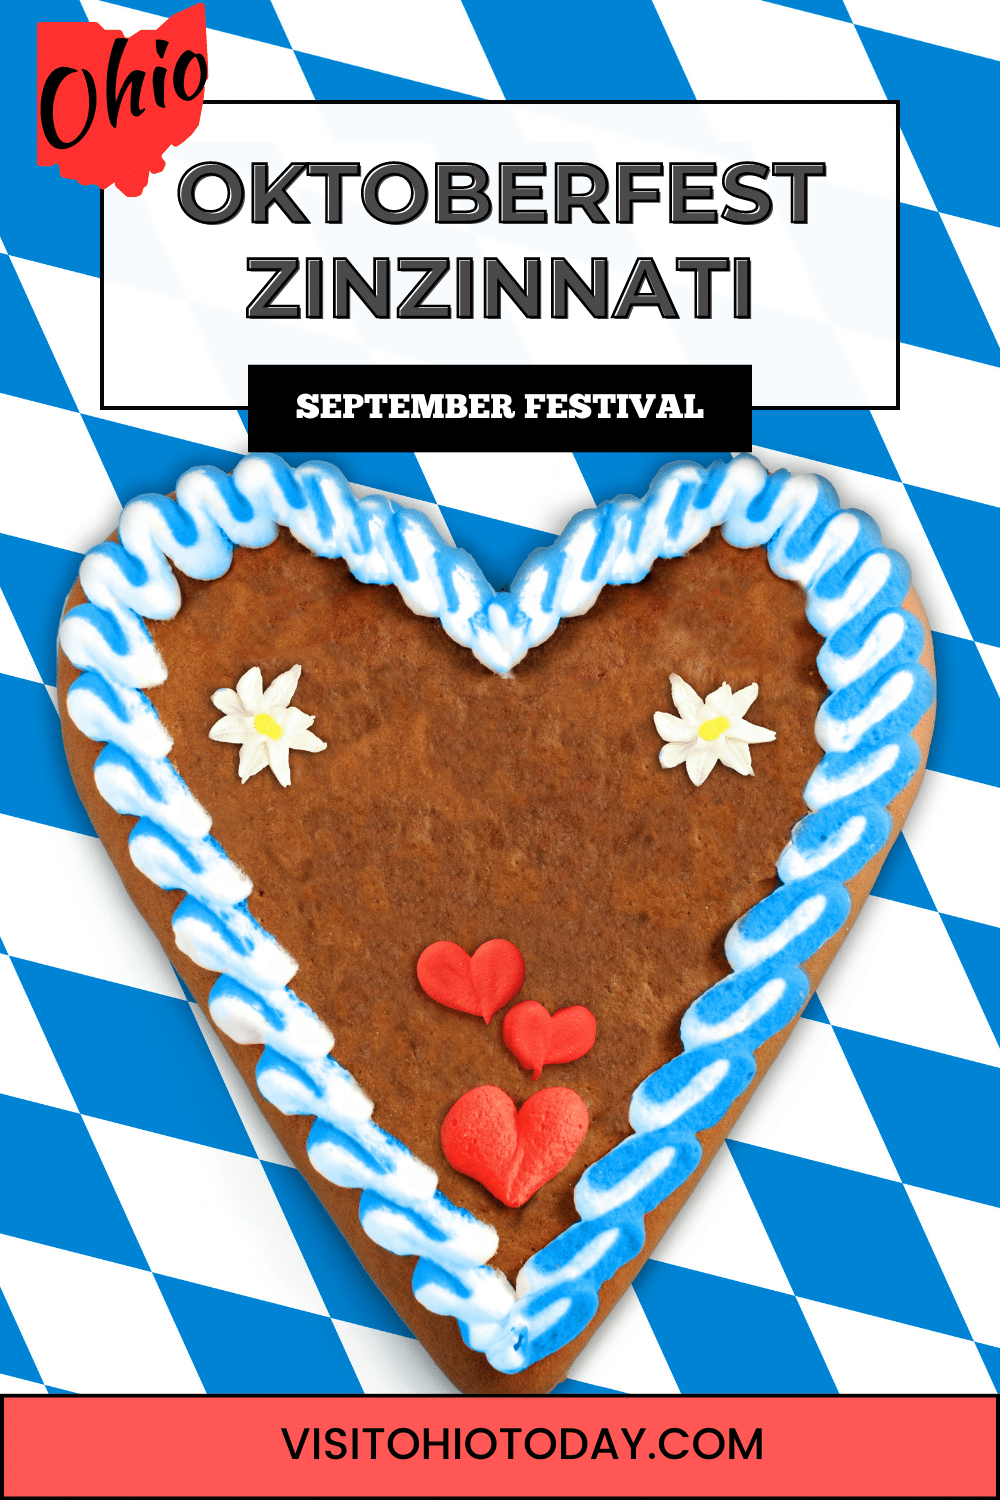 Oktoberfest Zinzinnati, the largest Oktoberfest in the nation, takes place at Sawyer Point & Yeatman’s Cove from September 14-17, 2023. This year, the festivities have been extended to four days, offering even more fun!